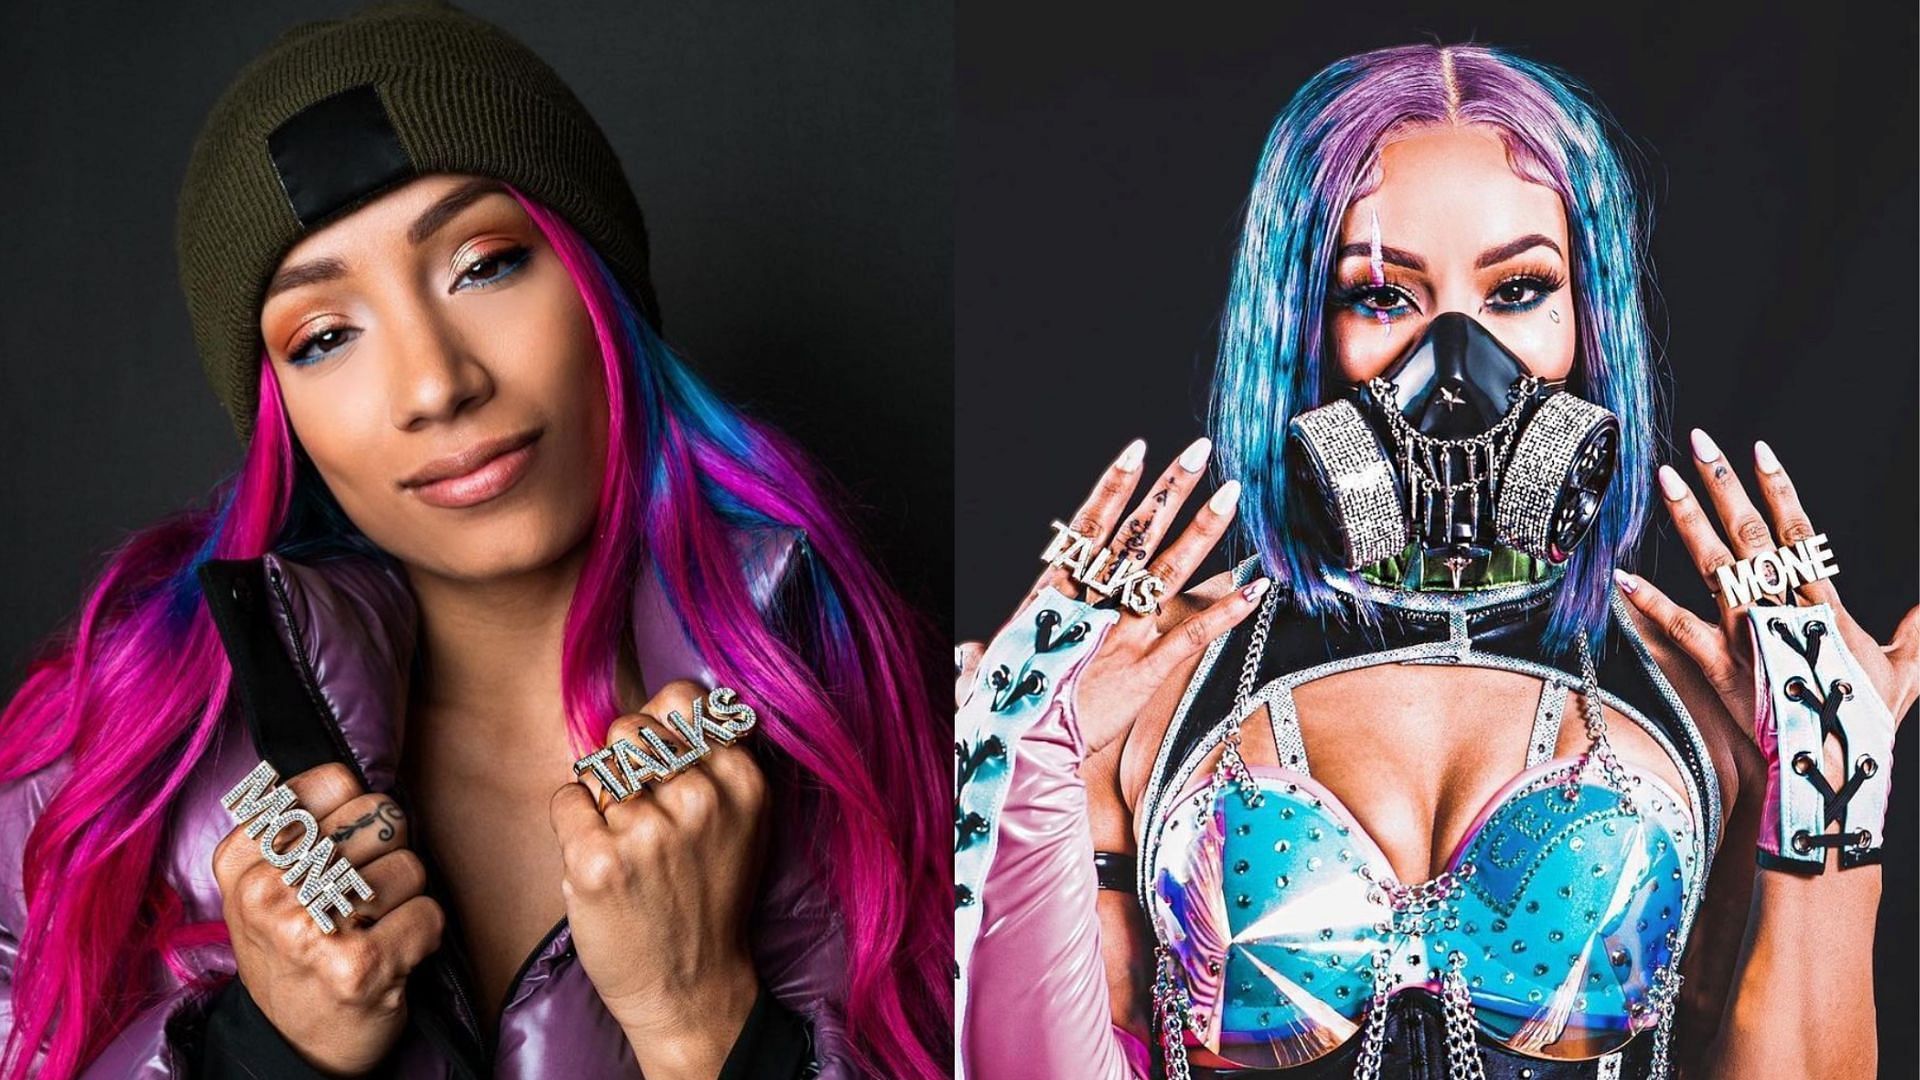 Unfinished business, a division in need - 5 reasons Sasha Banks should return to WWE